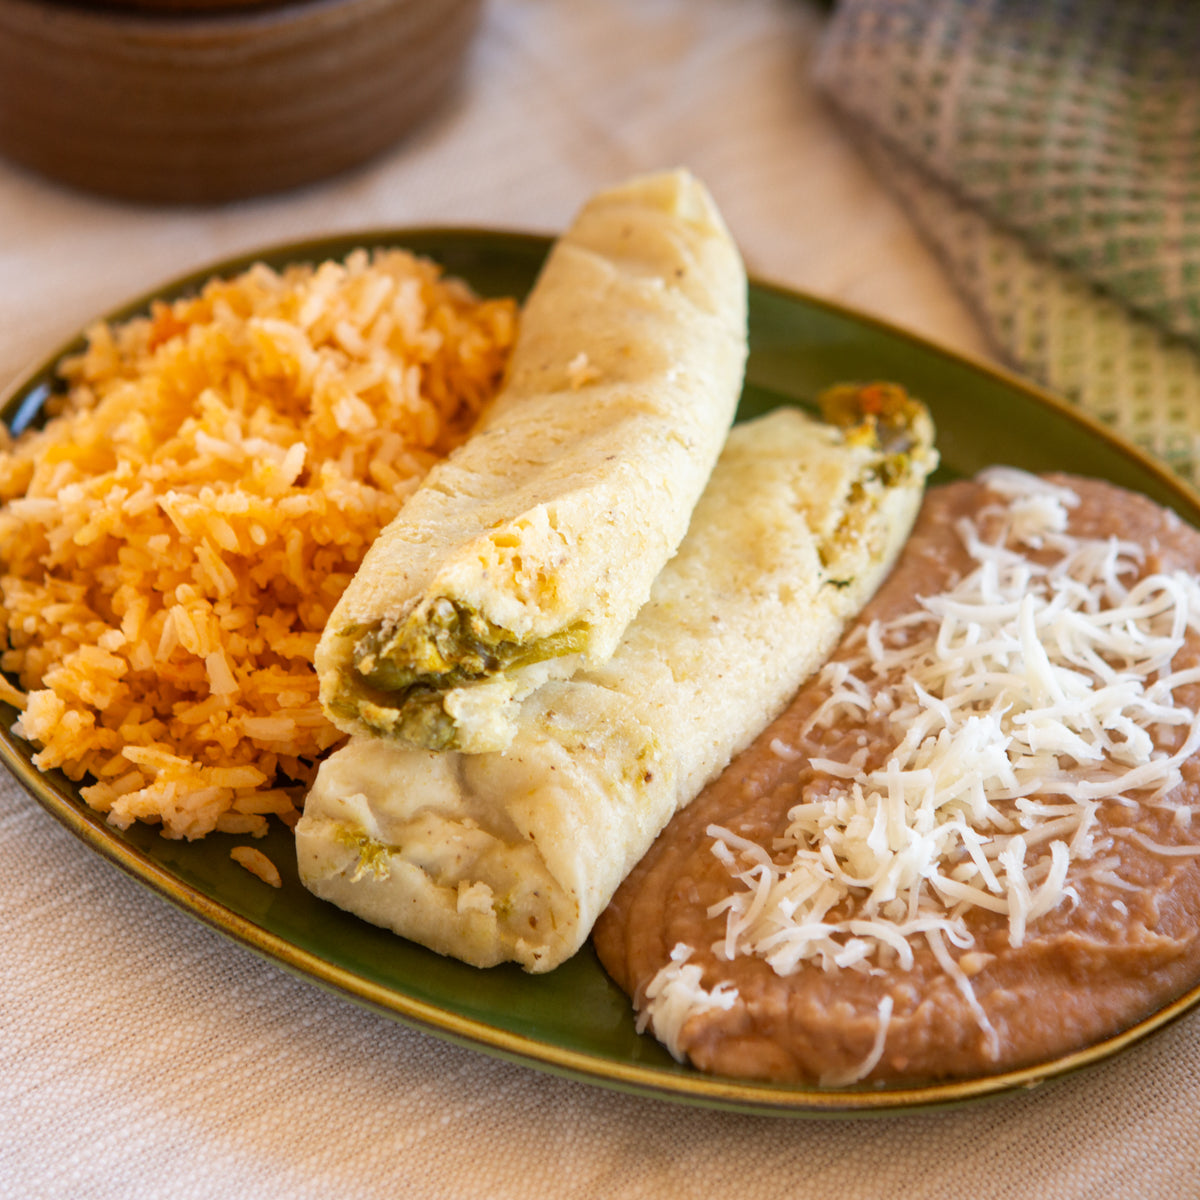 A plate with a cheese-topped burrito next to servings of orange rice and refried beans sprinkled with shredded Hatch Green Chile Veggie Tamales, placed on a beige tablecloth.